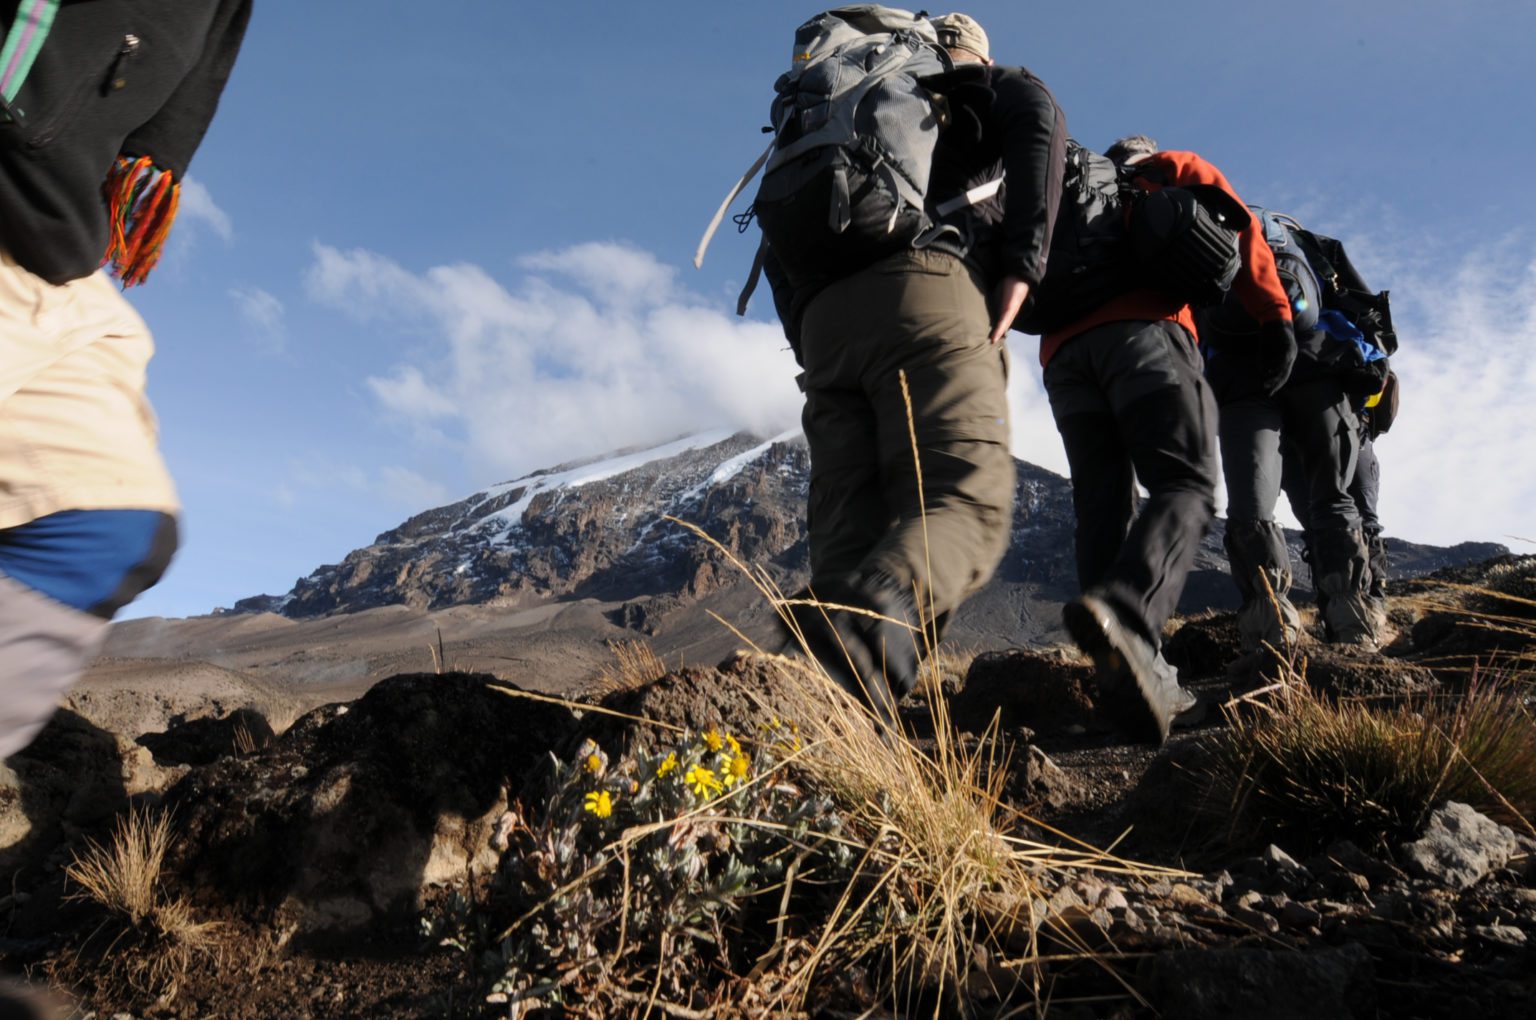 Hikers Climbing Mt Kilimanjaro with the summit in background on hiking and climbing vacation